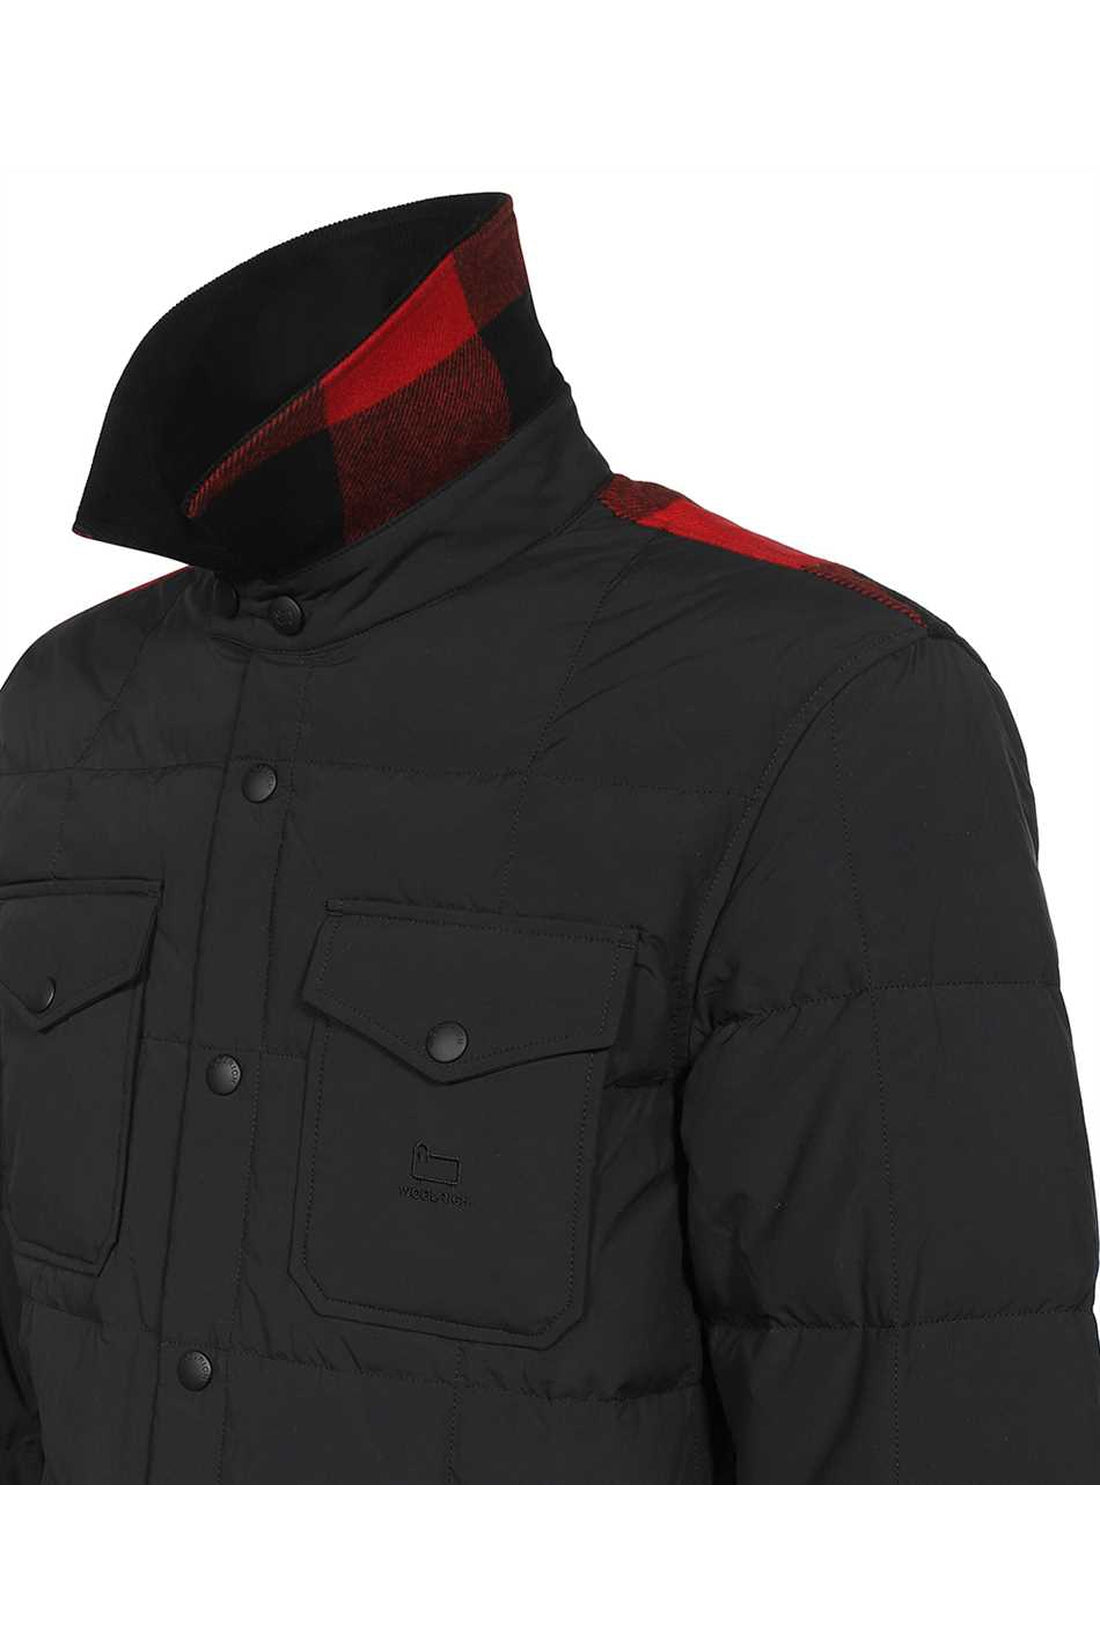 Woolrich-OUTLET-SALE-Heritage Terrain padded jacket-ARCHIVIST